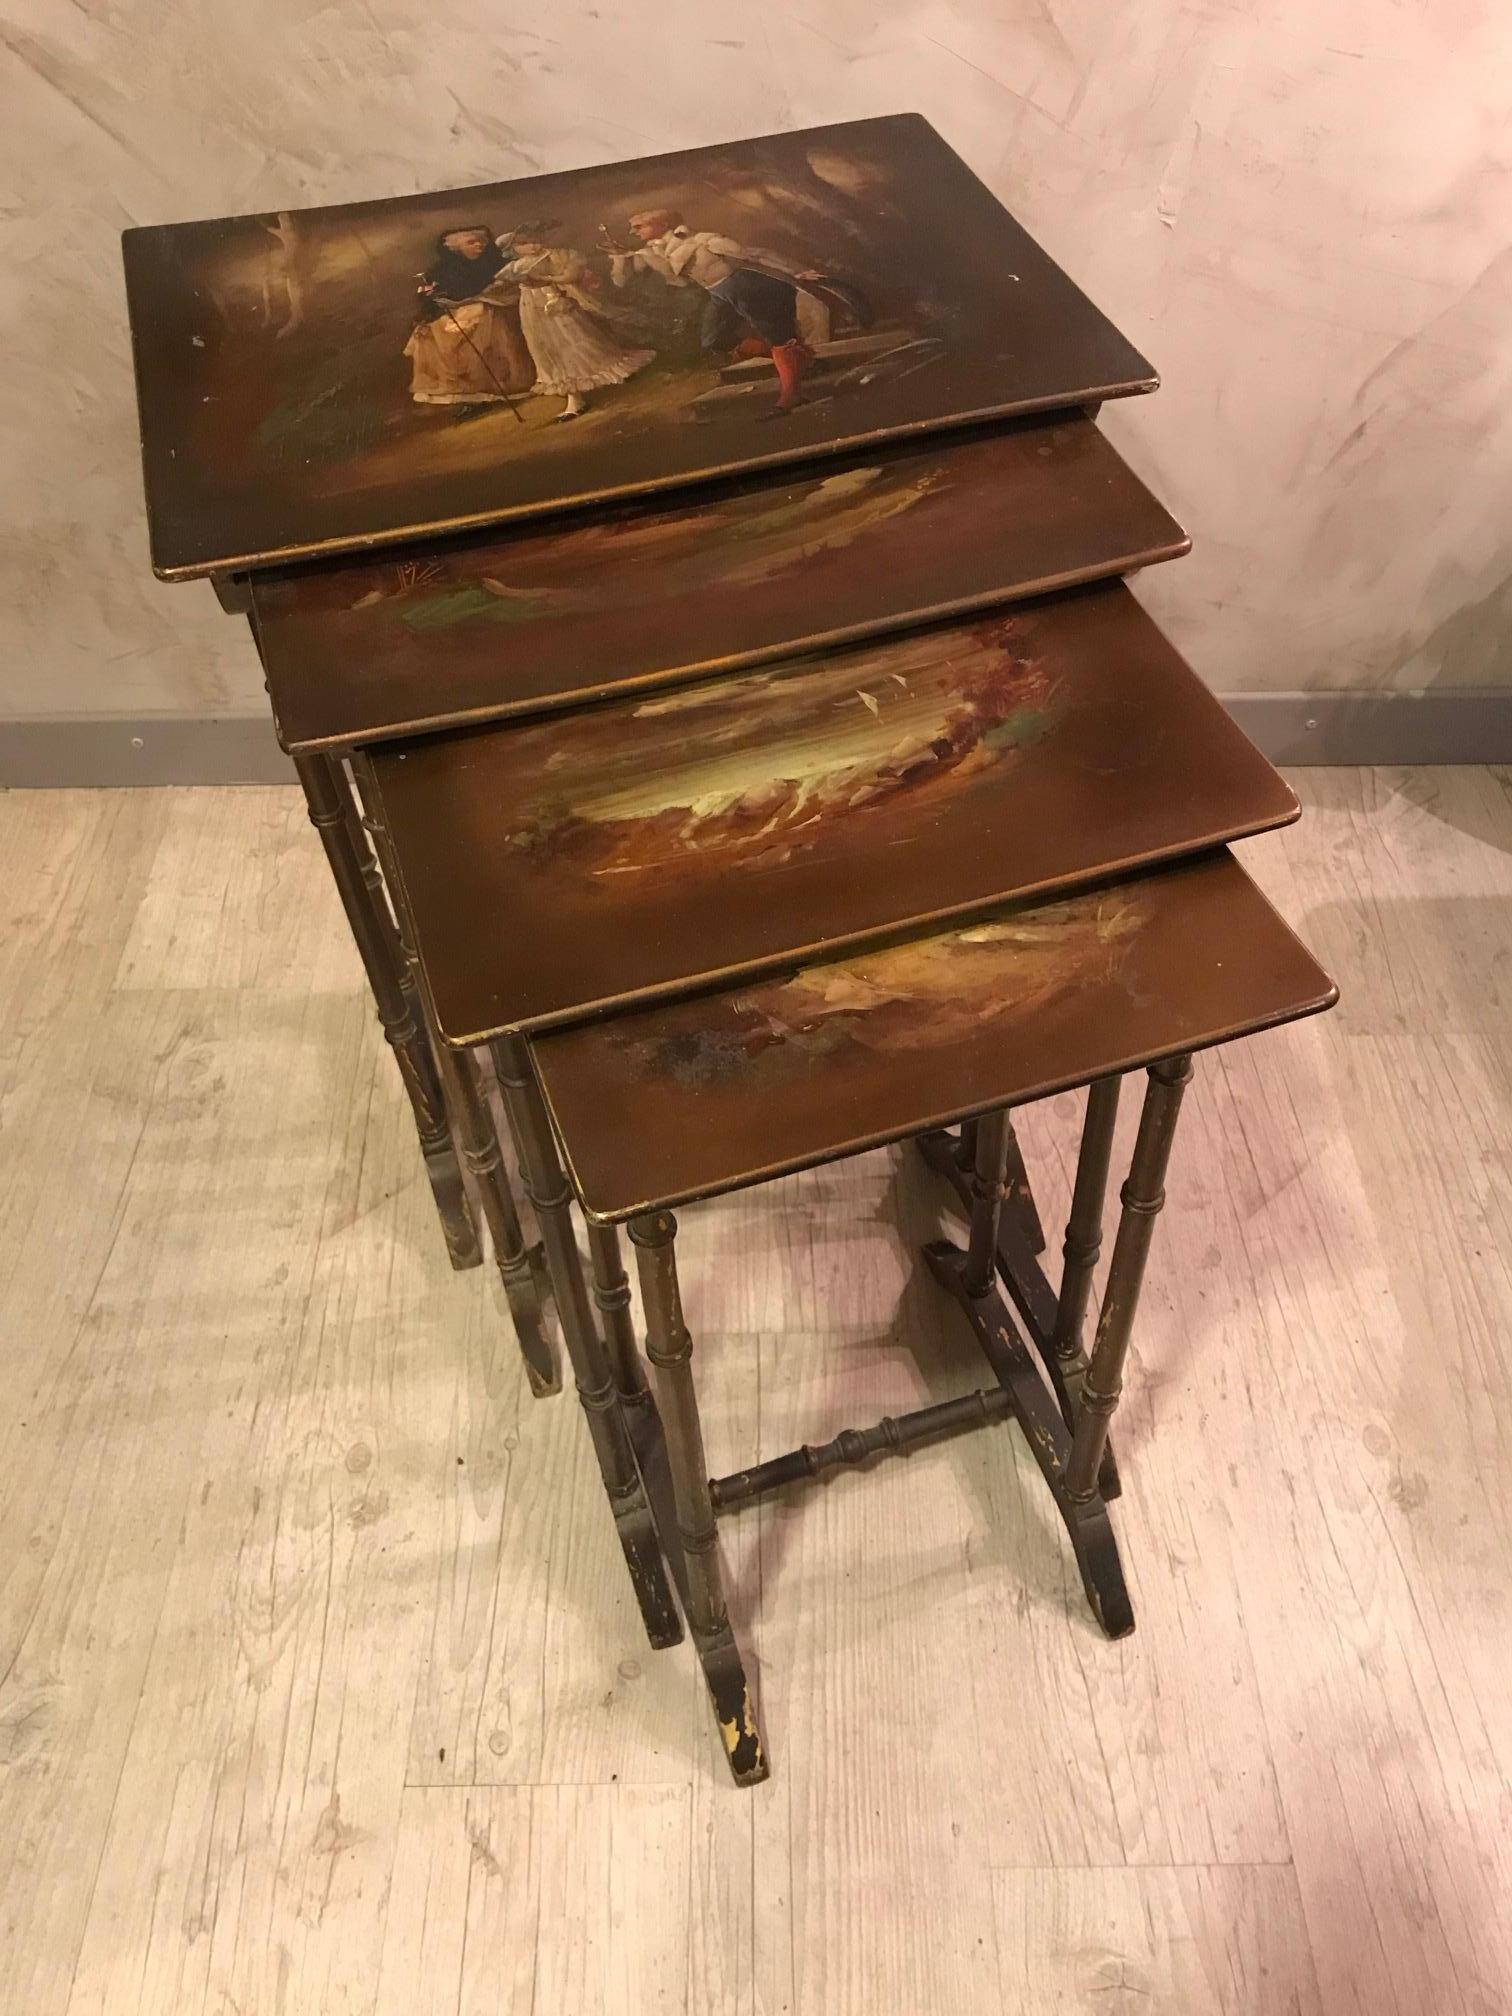 Very nice and original 20th century French painting nesting tables from the 1900s. 
Four nesting tables with each a different painting, on the biggest one we can see two women walking and a men with a magnifying glass, very romantique scene. 
The